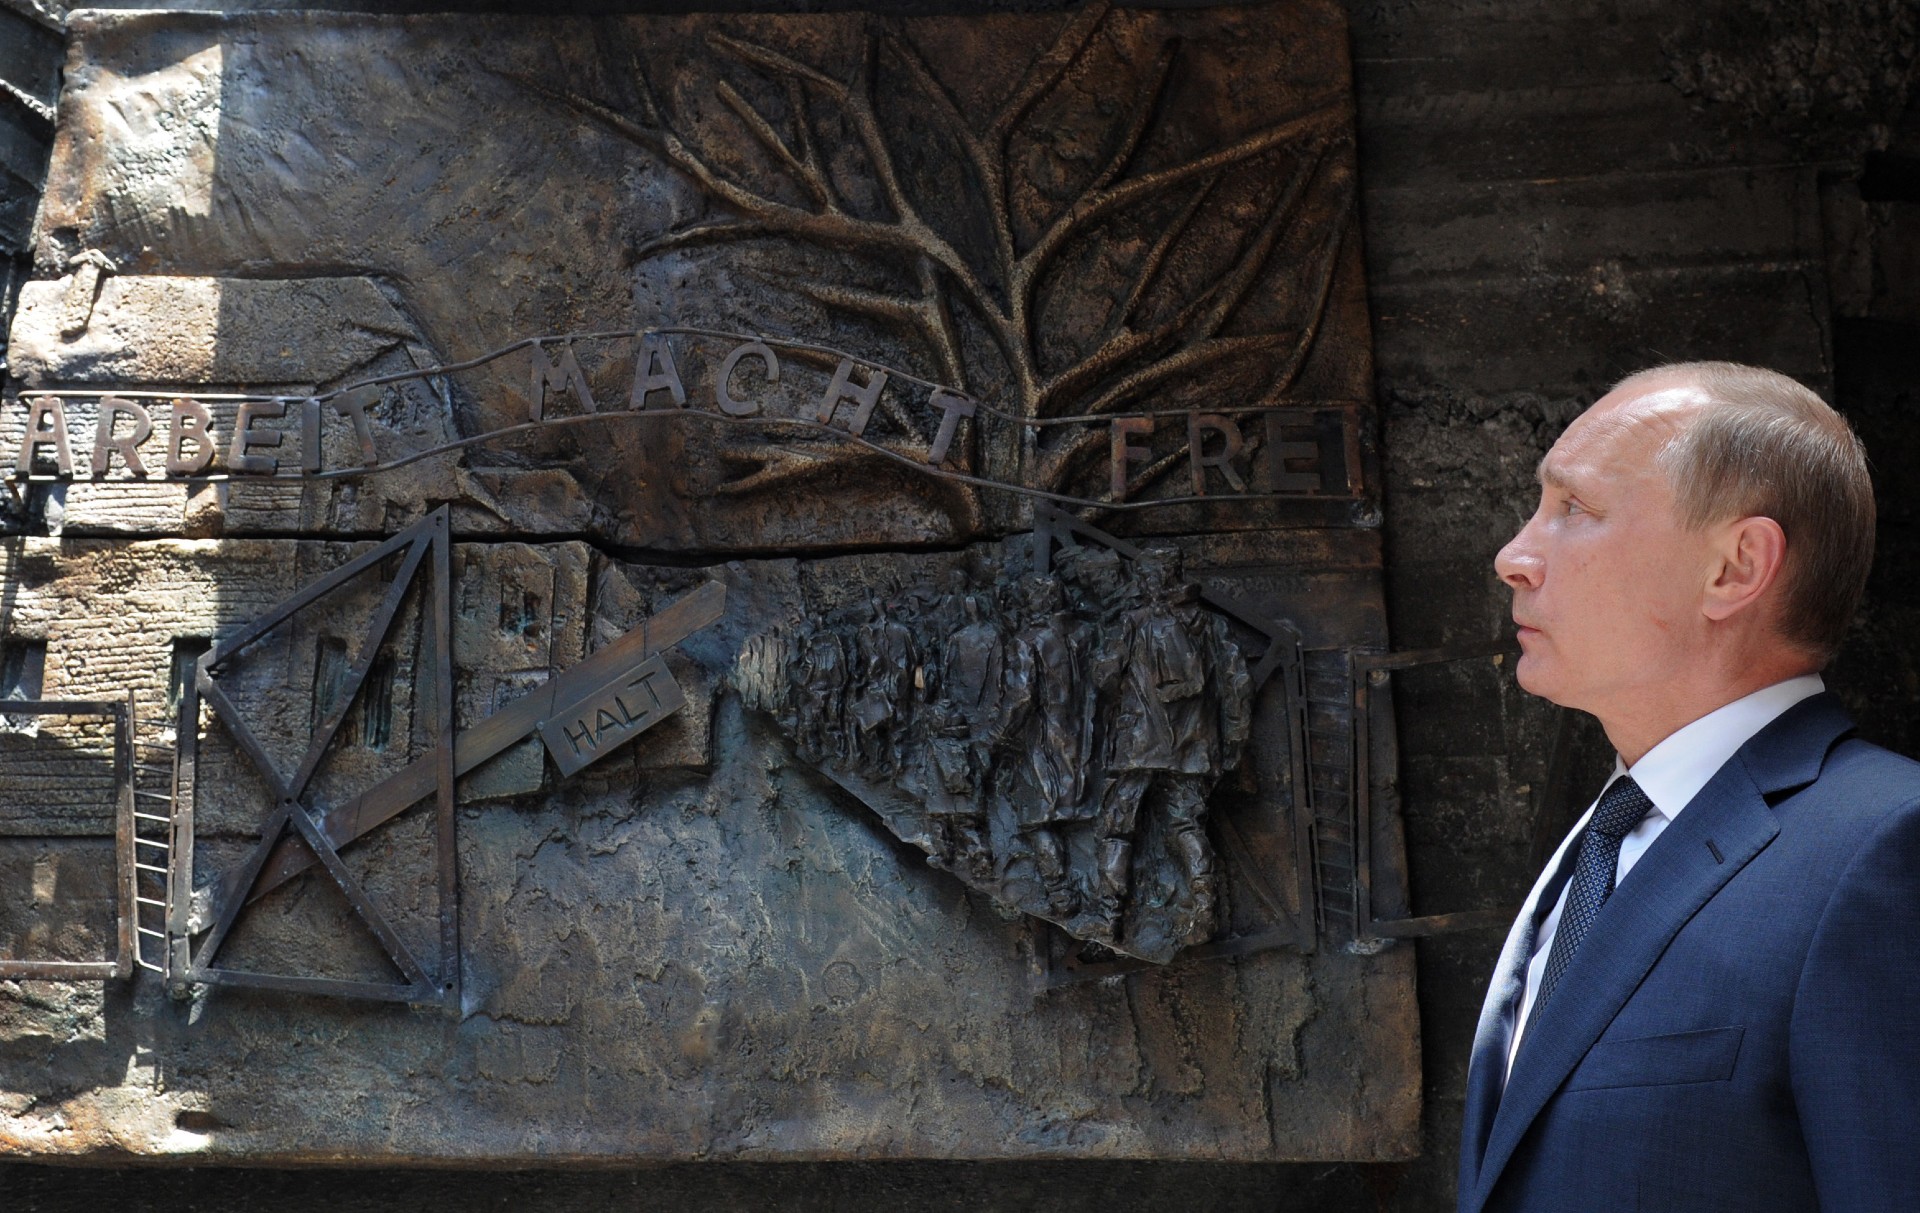 Vladimir Putin takes part in a ceremony to unveil the brand-new "Victory Monument" in Israel's Netanya in 2012 (AFP)